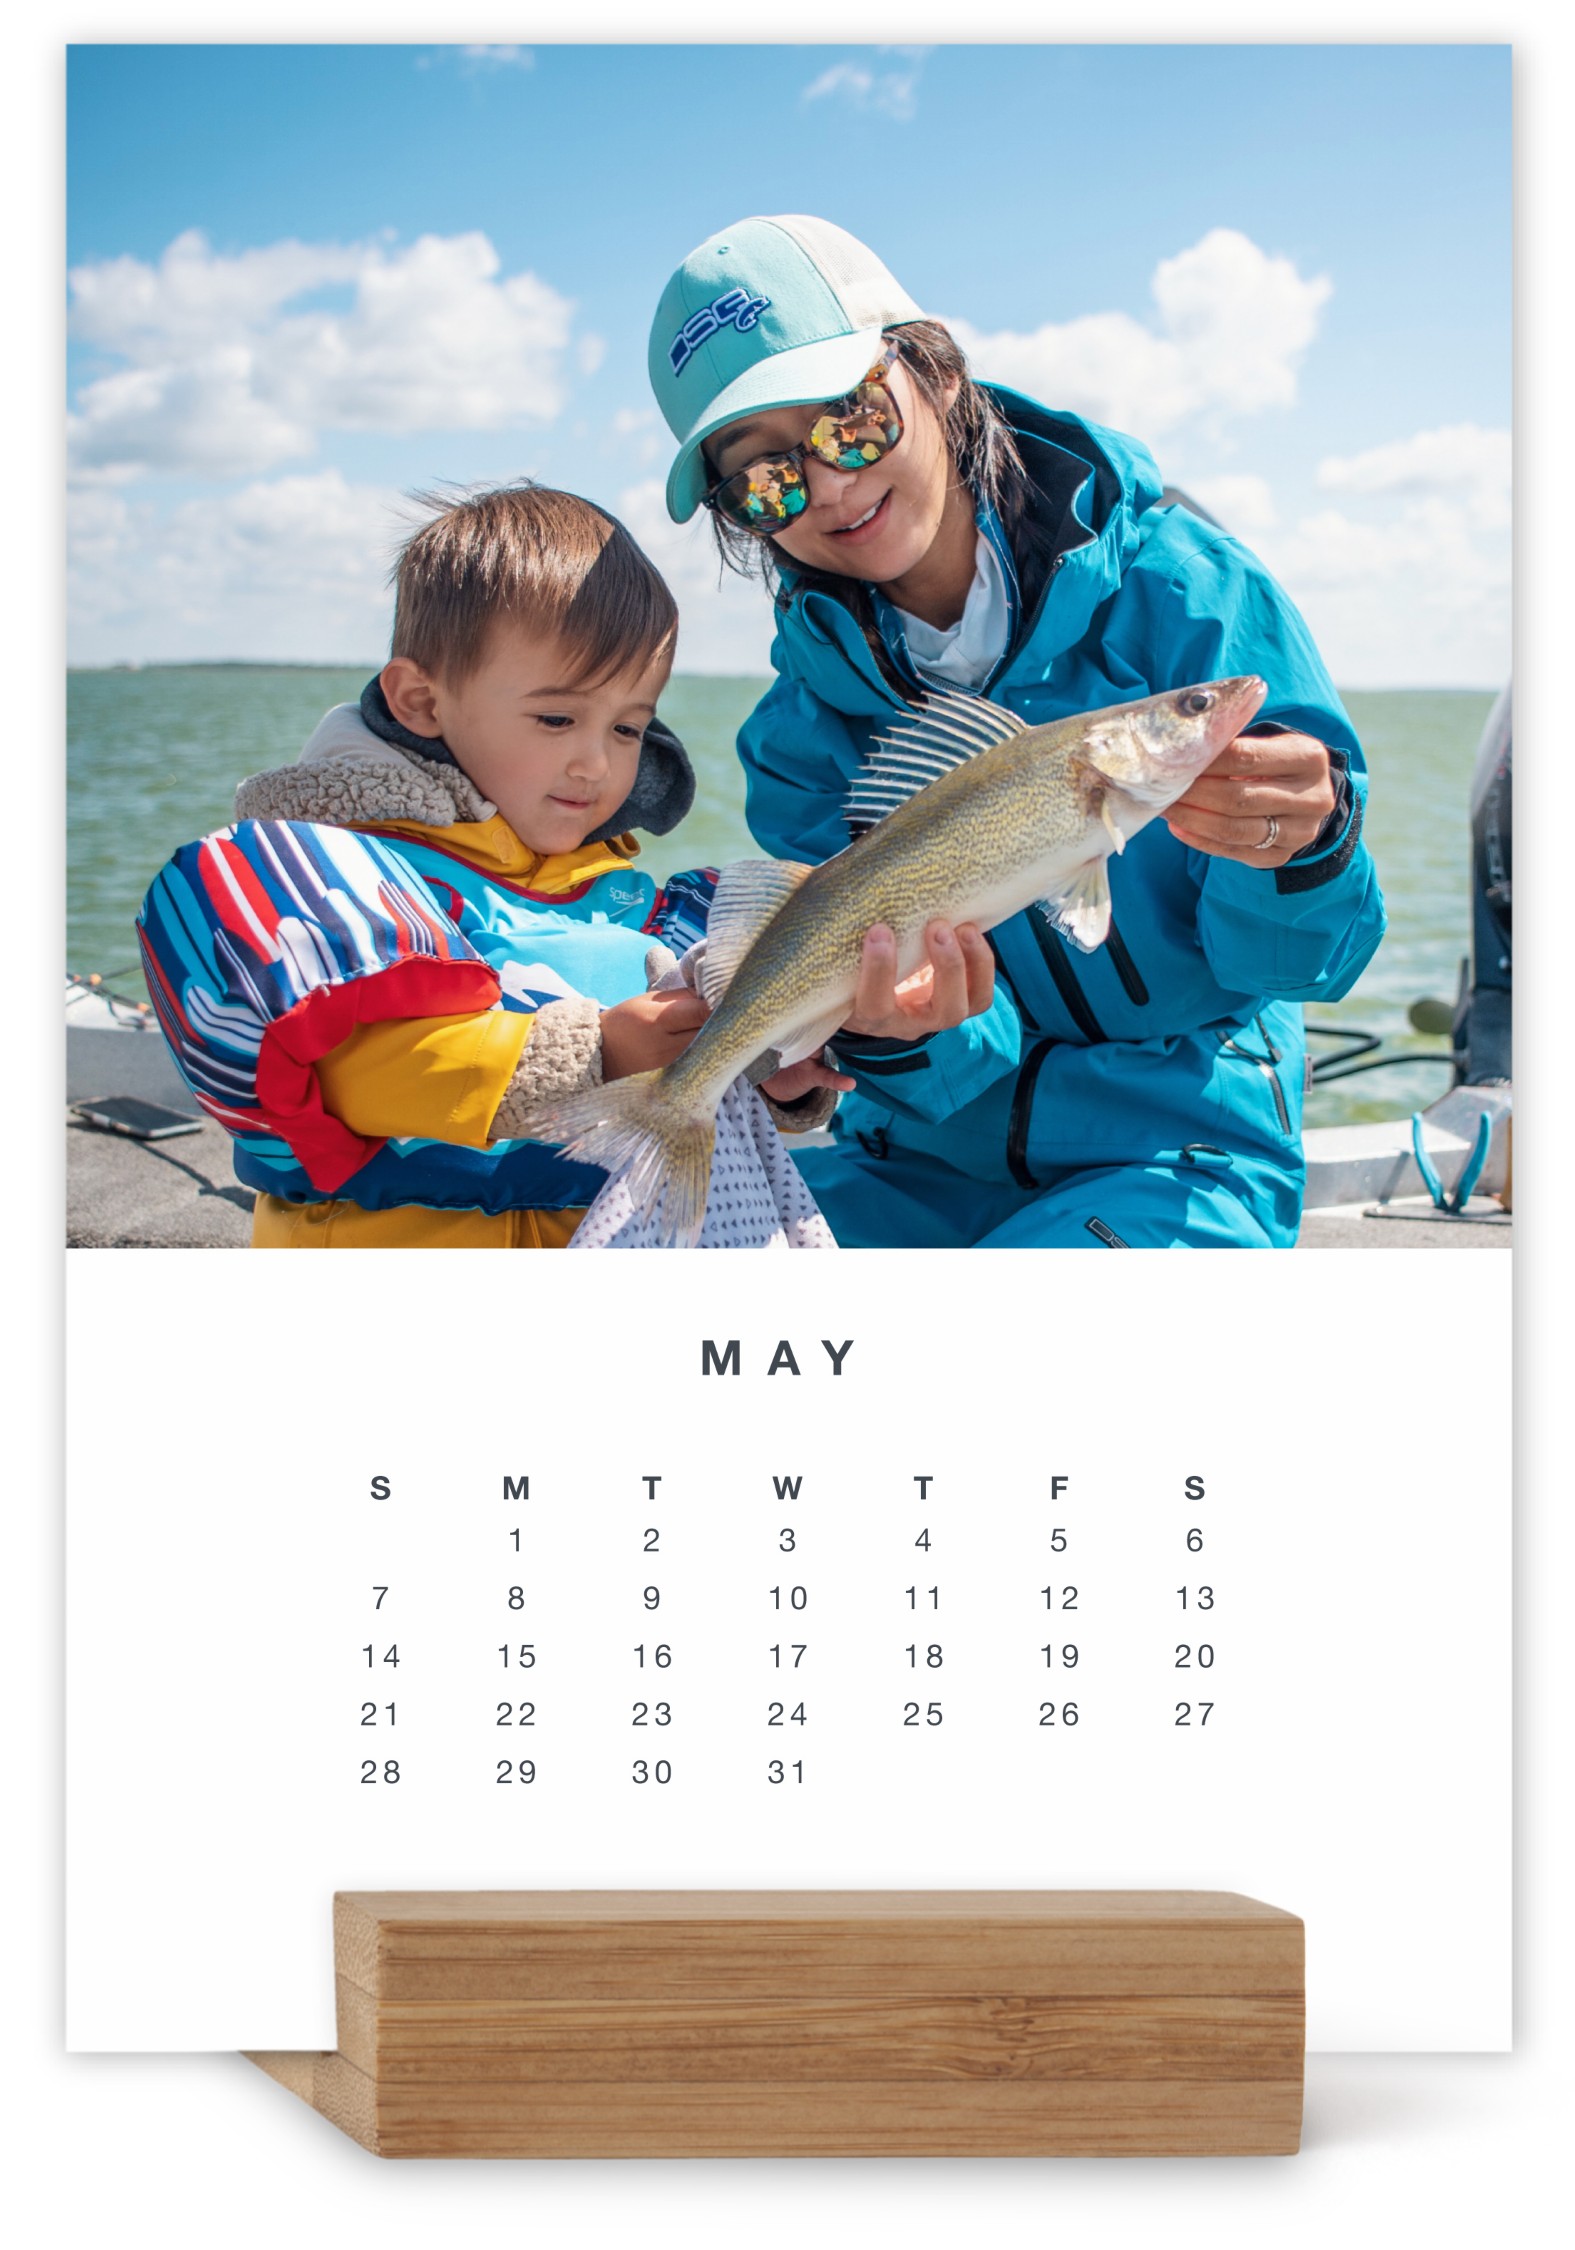 Photo Gallery Easel Calendar by Yours Truly Shutterfly